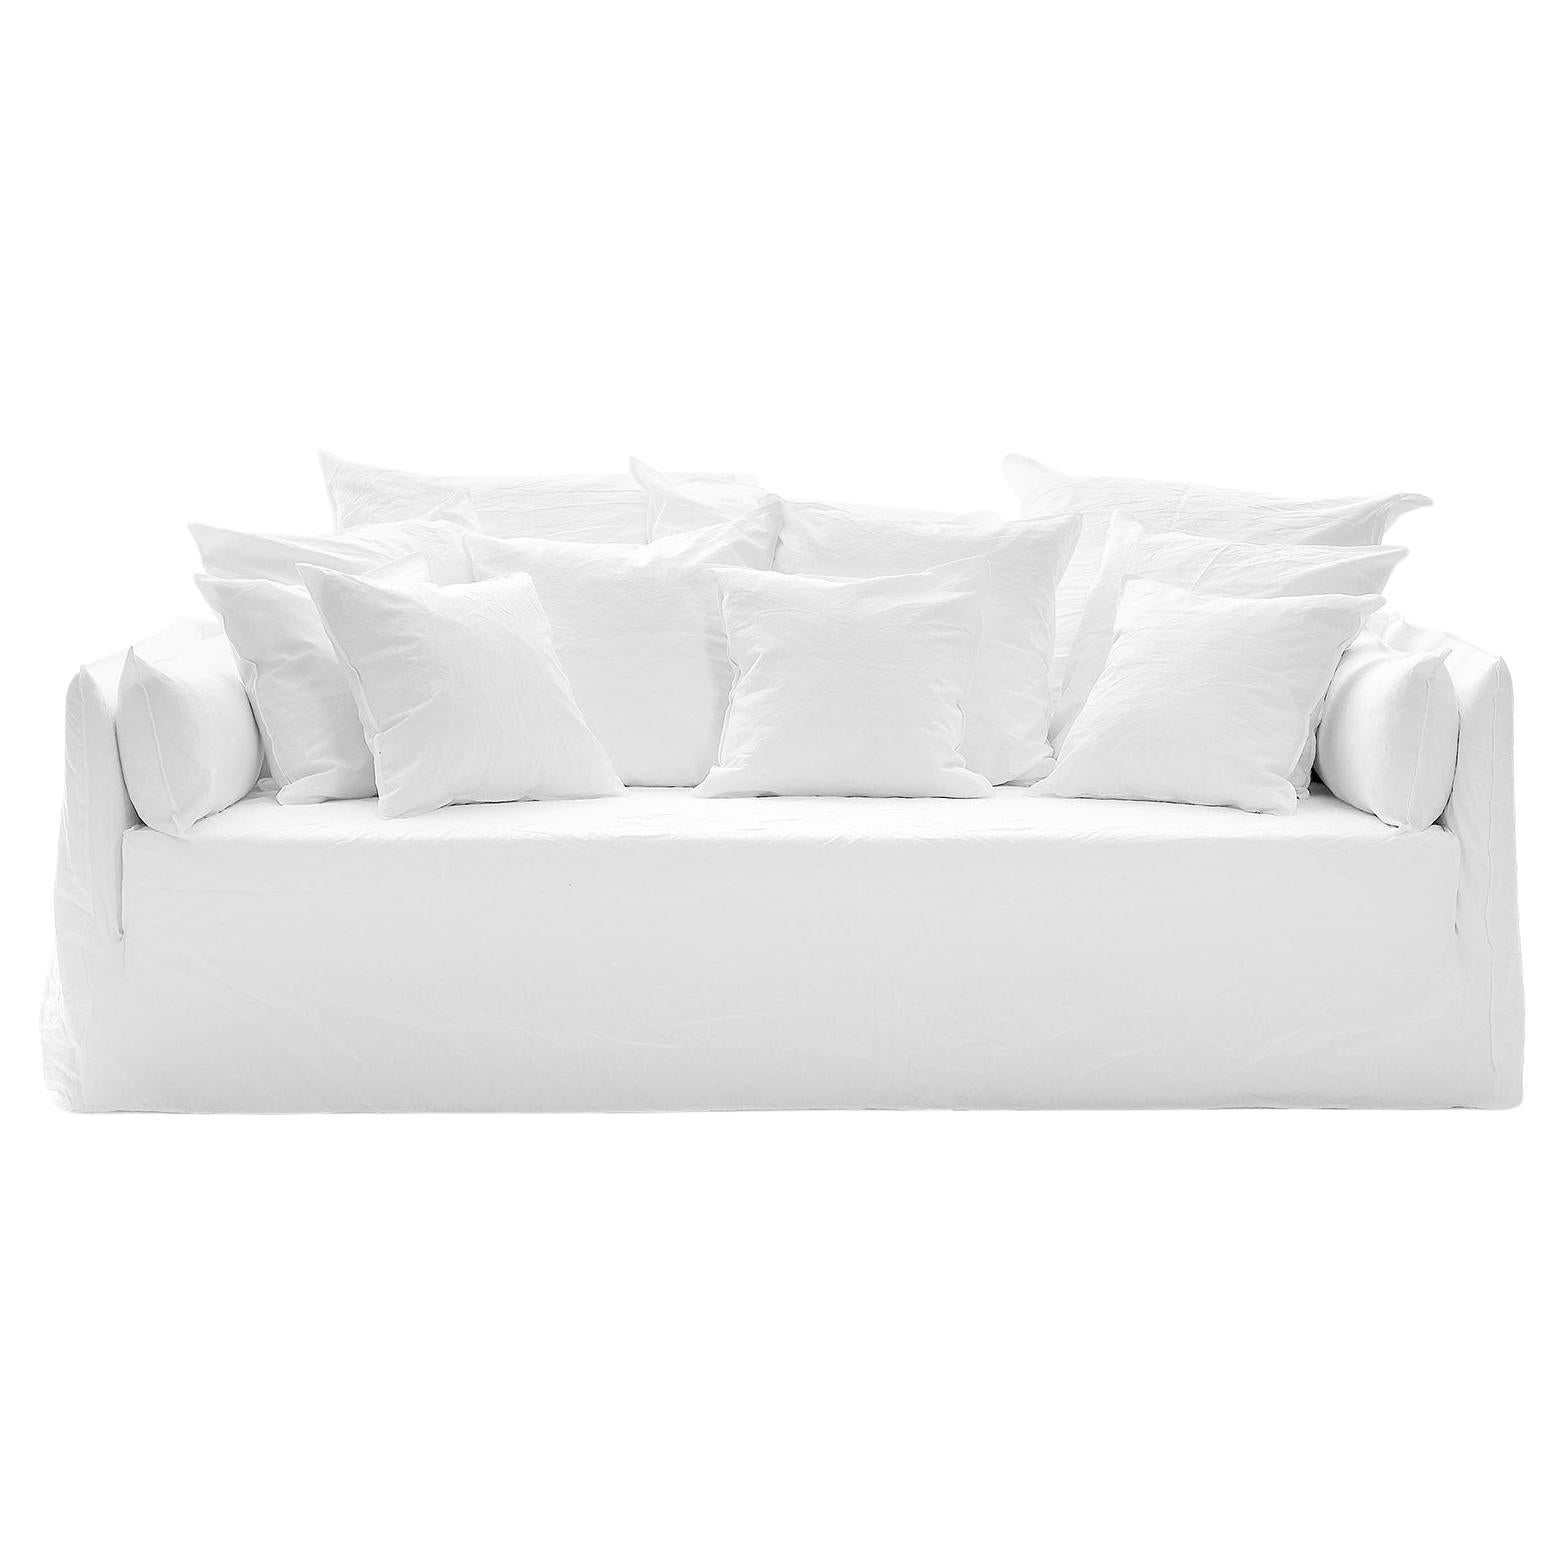 Gervasoni Ghost 16 Sofa in White Linen Upholstery by Paola Navone For Sale